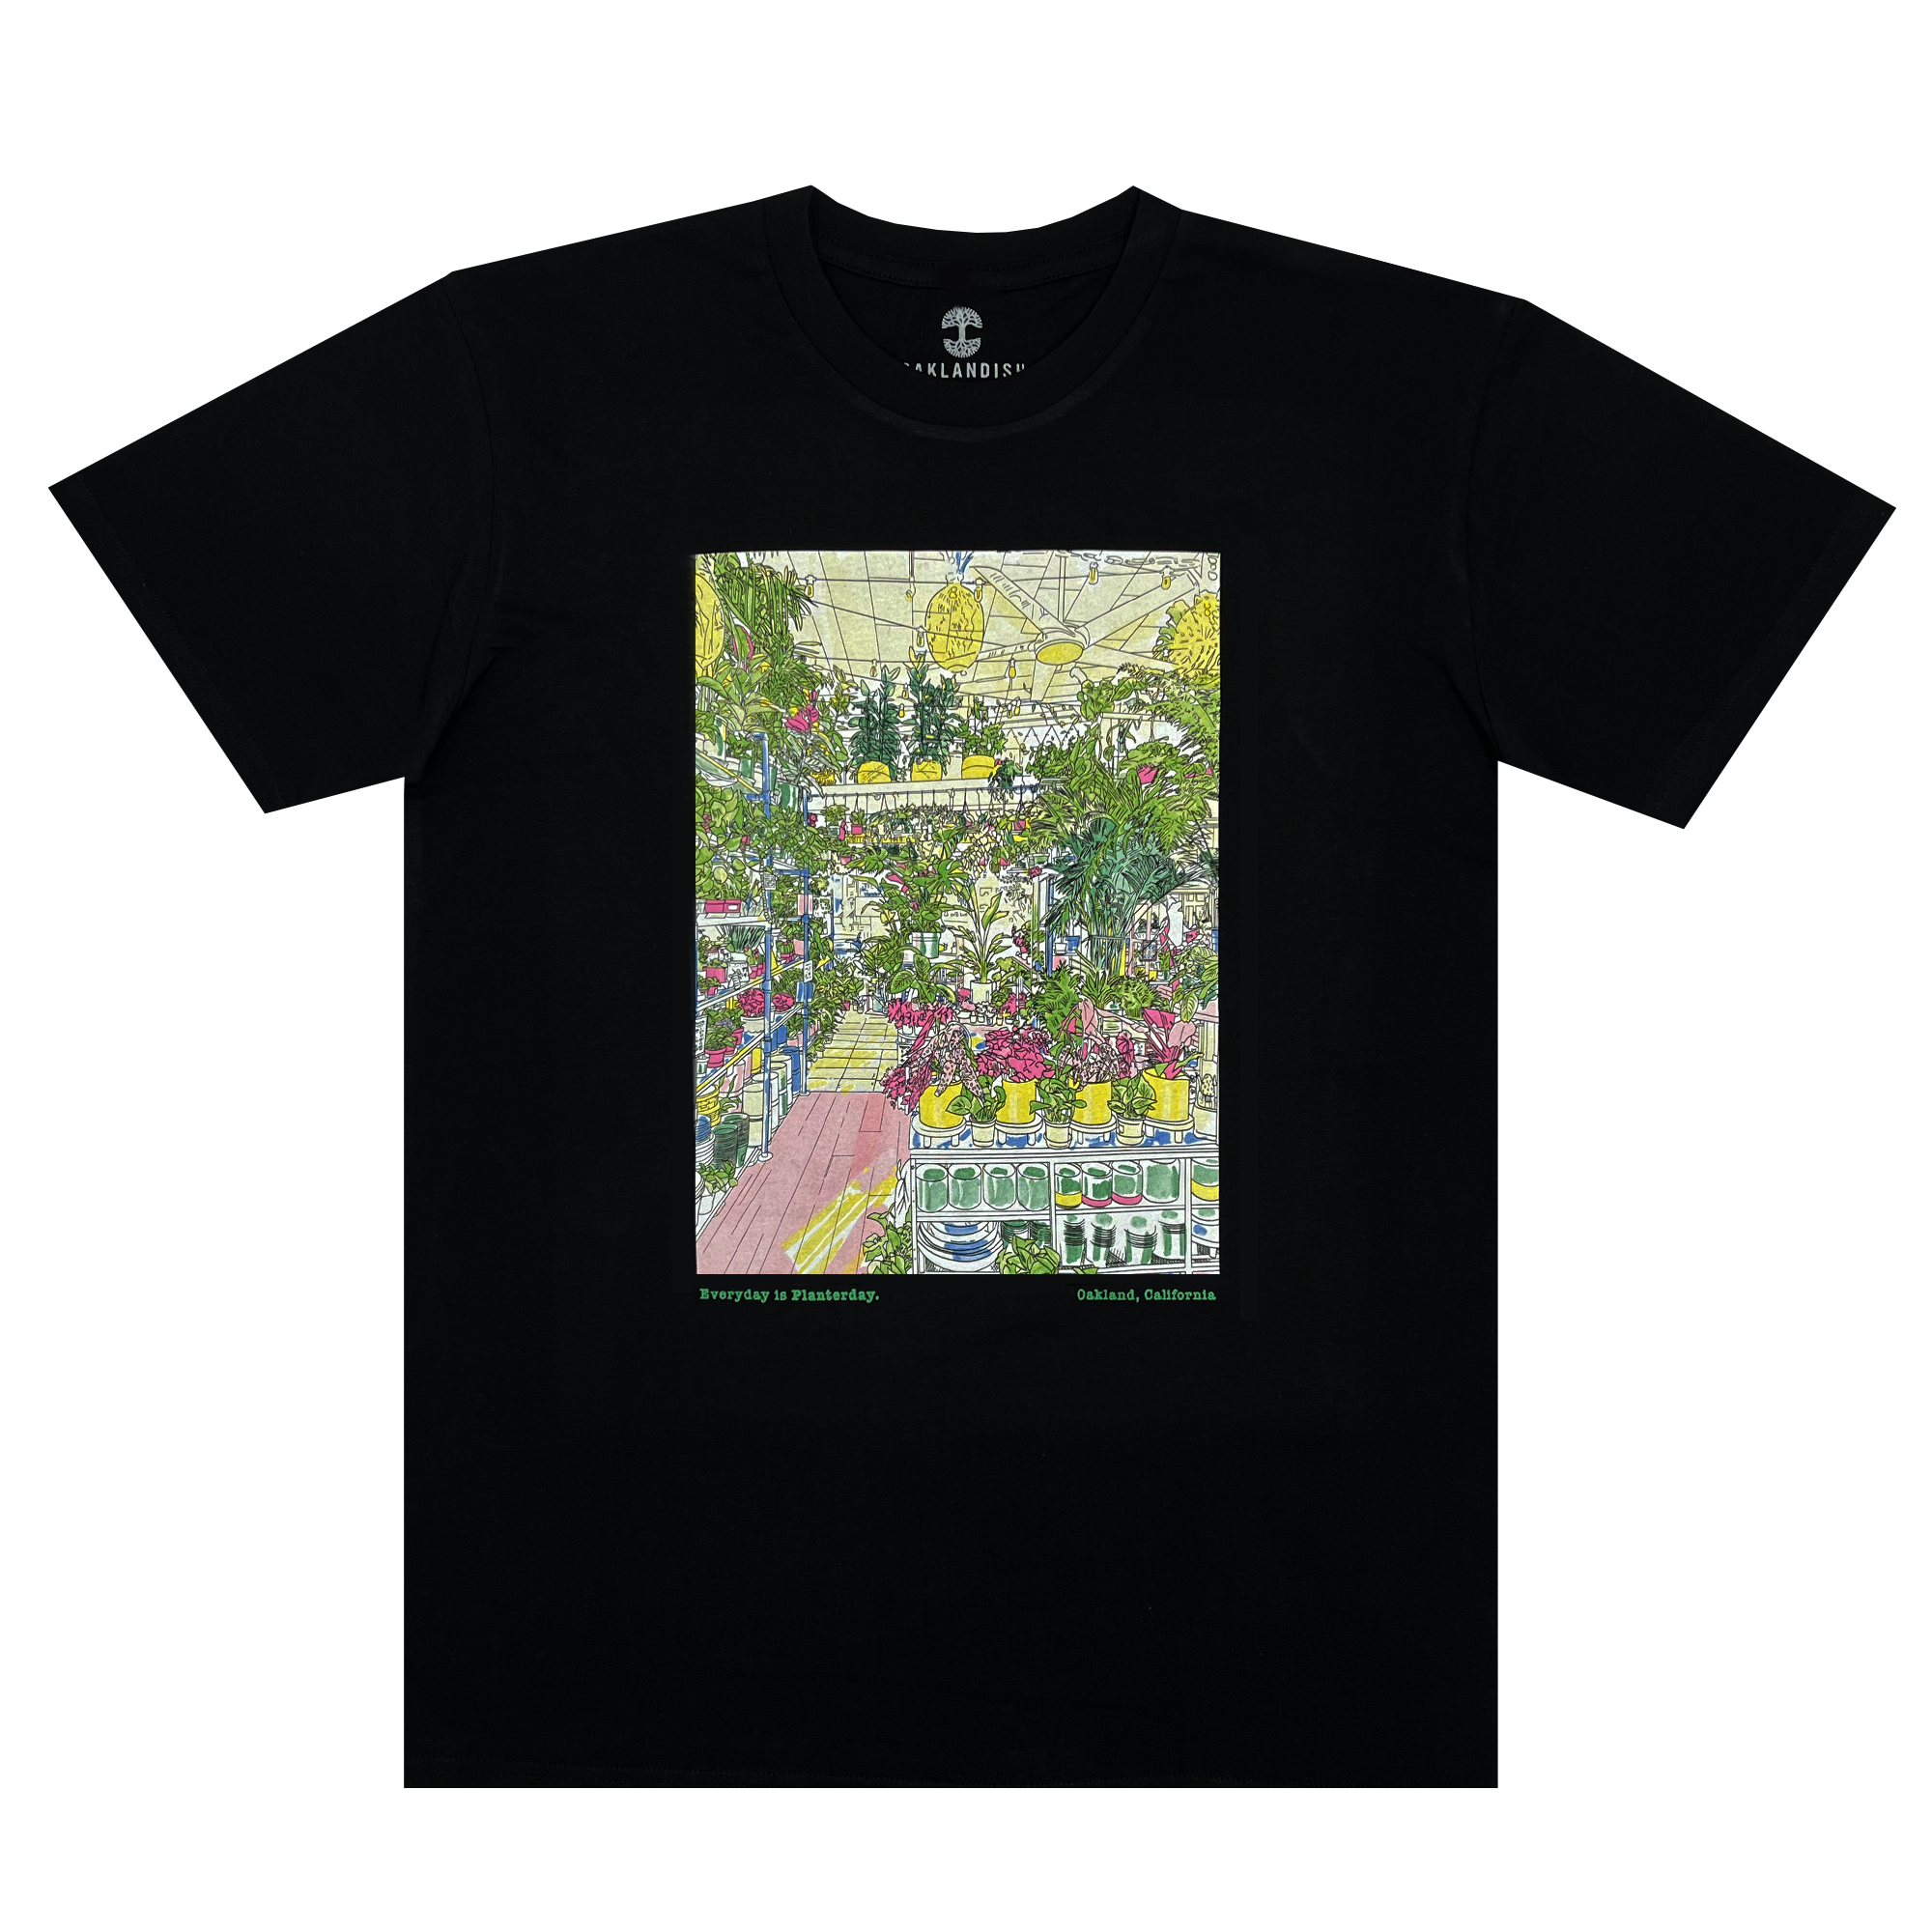 Black cotton t-shirt with a large hand-drawn full color graphic of the inside of Planterday, a mission-driven plant shop in Oakland, CA.